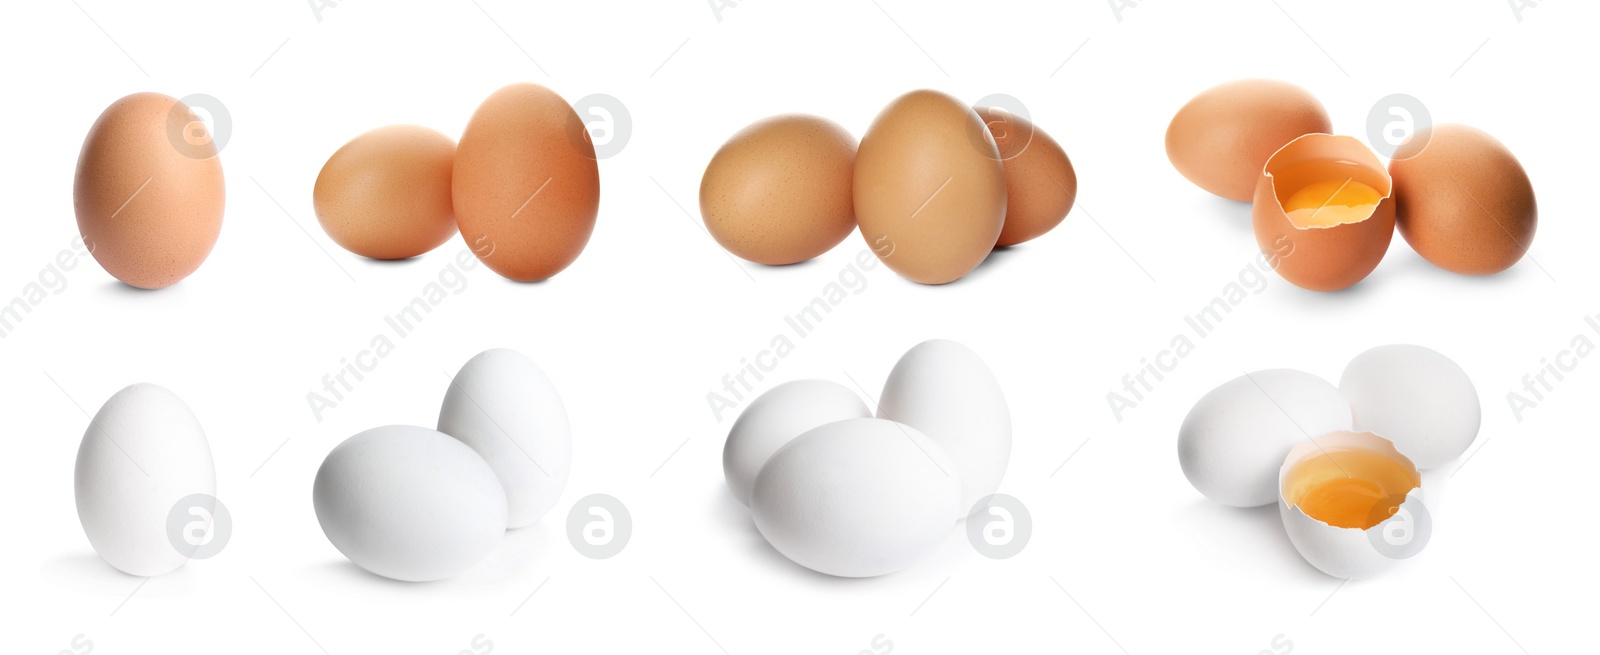 Image of Set of whole and broken eggs on white background, banner design 